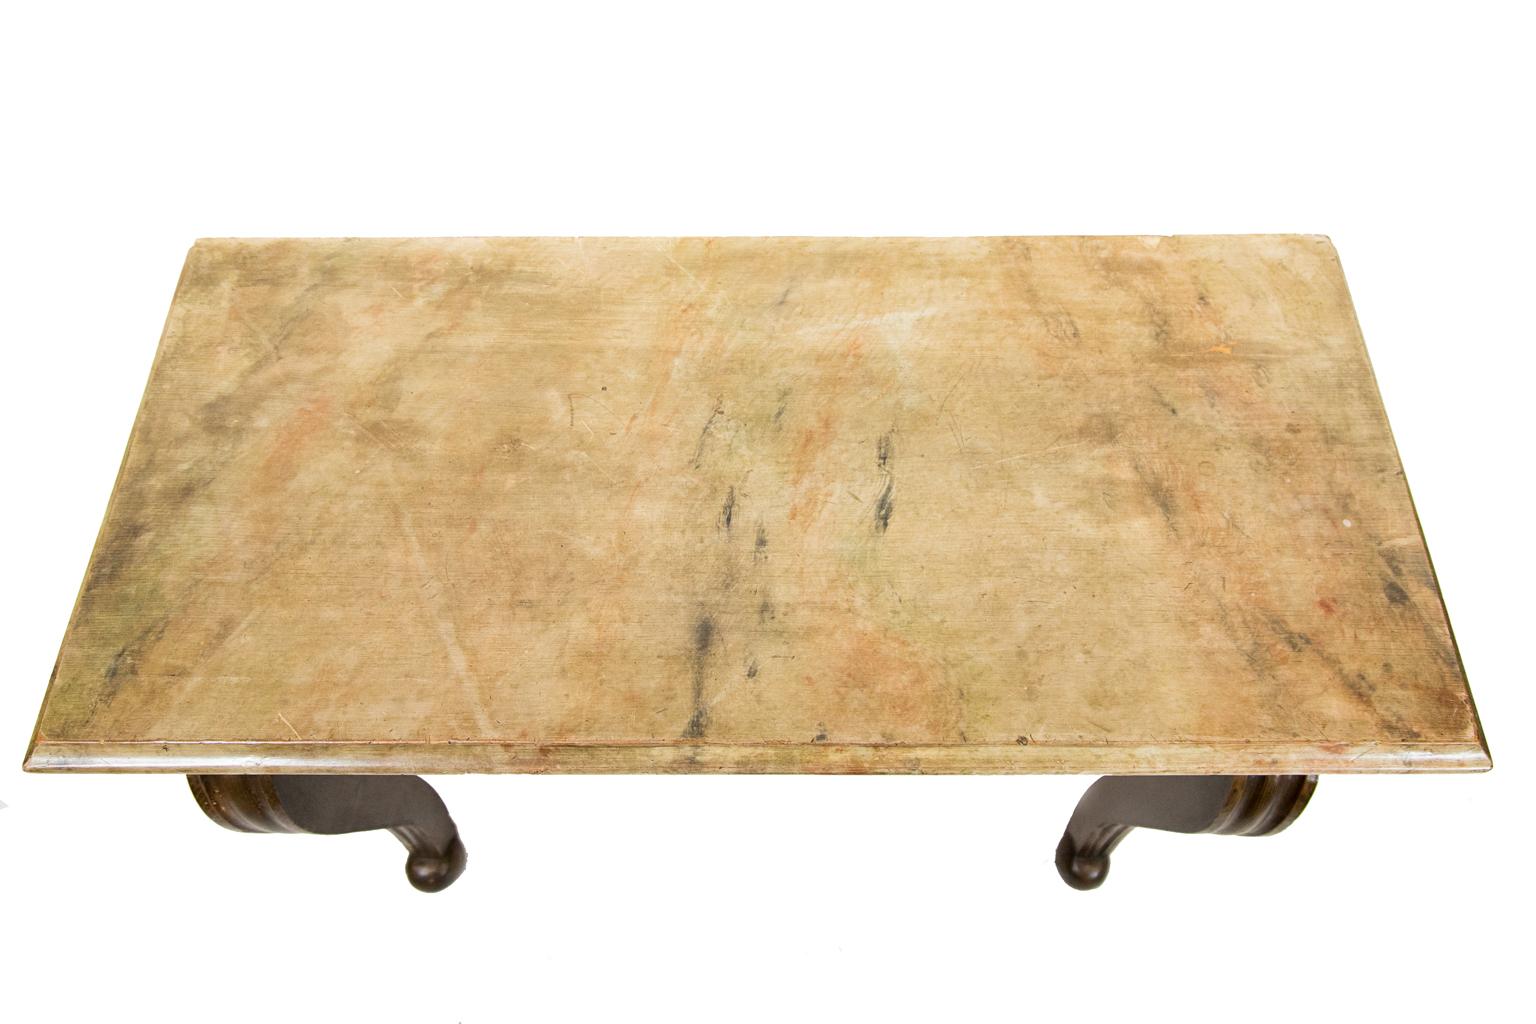 English faux painted console table, the top painted to simulate marble, while the base is painted to simulate wood. The table has a large heavy cast brass ornament in the front apron.